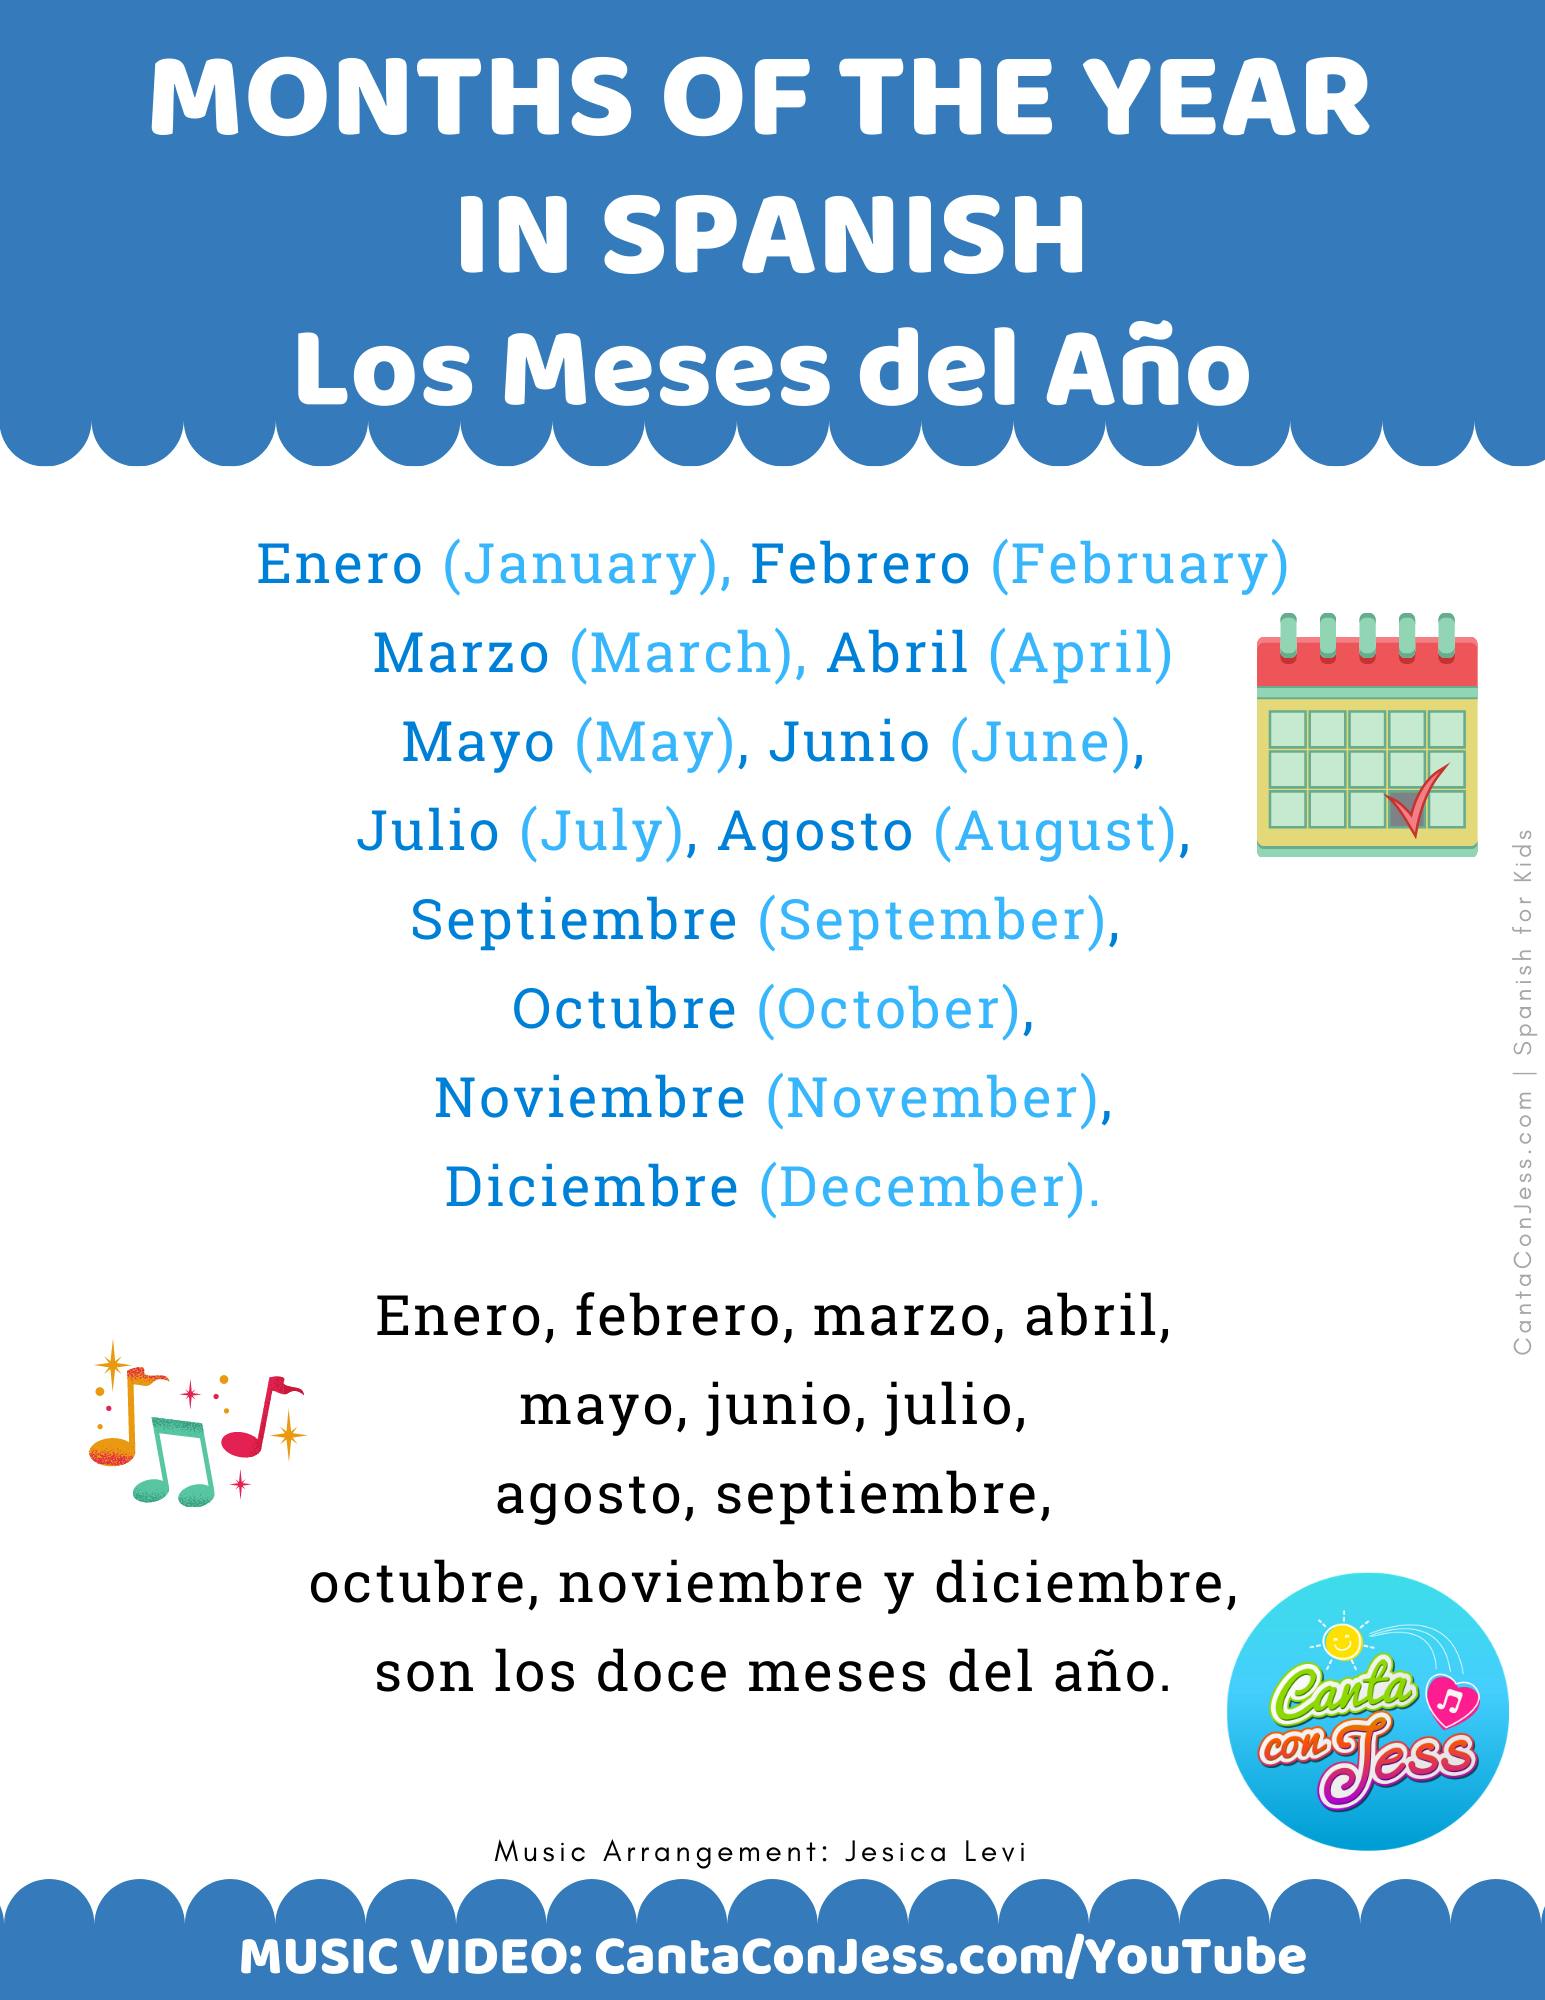 Months of the Year in Spanish LYRICS - Los Meses del Año